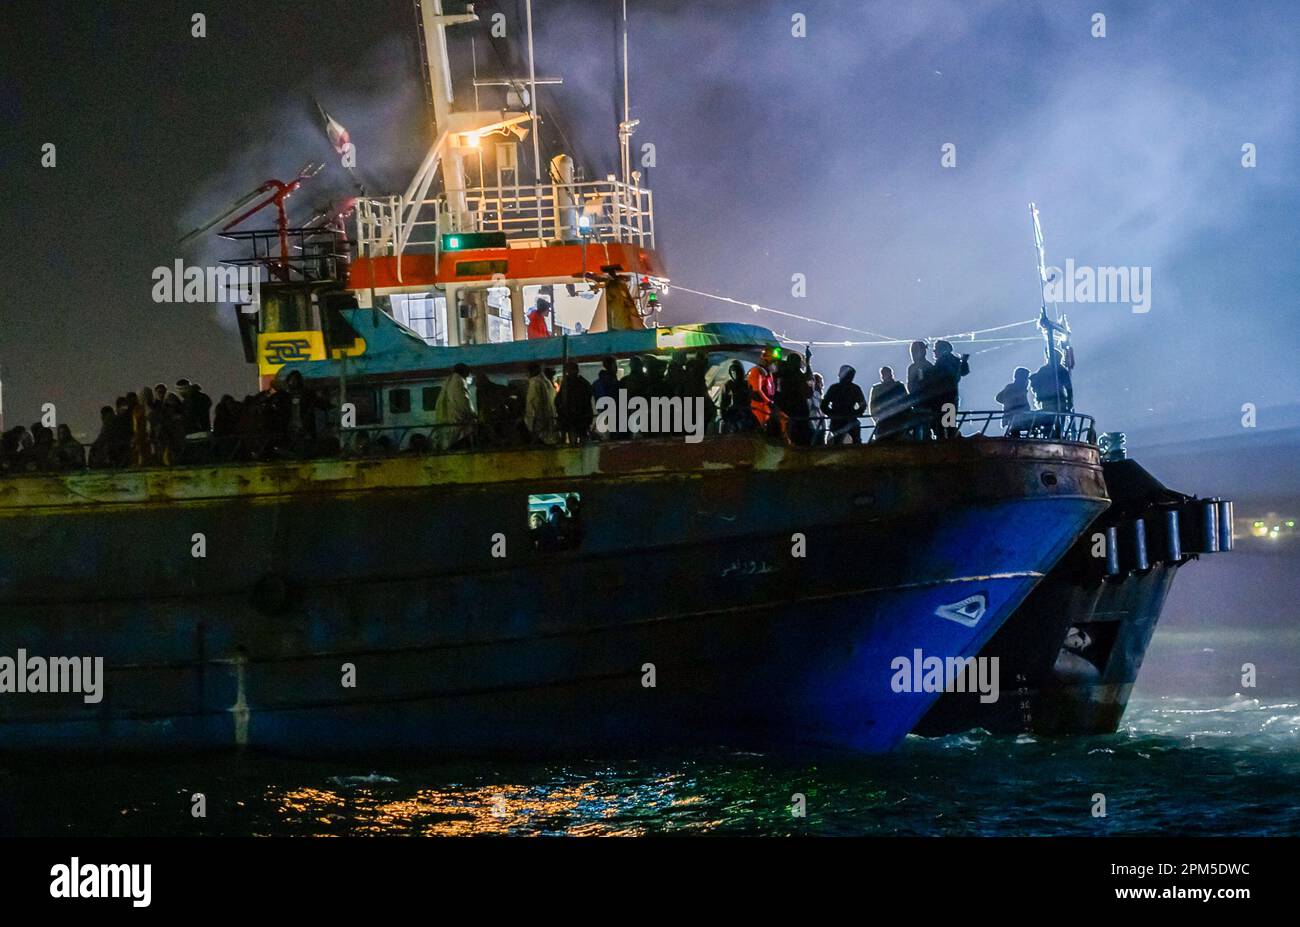 https://c8.alamy.com/comp/2PM5DWC/file-a-fishing-boat-with-some-500-migrants-enters-the-southern-italian-port-of-crotone-early-saturday-march-11-2023-italys-right-wing-government-has-declared-a-state-of-emergency-to-help-it-cope-with-a-surge-in-migrants-arriving-on-the-countrys-southern-shores-premier-giorgia-meloni-and-her-cabinet-on-tuesday-april-11-decided-to-impose-the-emergency-status-for-six-months-ap-photovaleria-ferraro-file-2PM5DWC.jpg